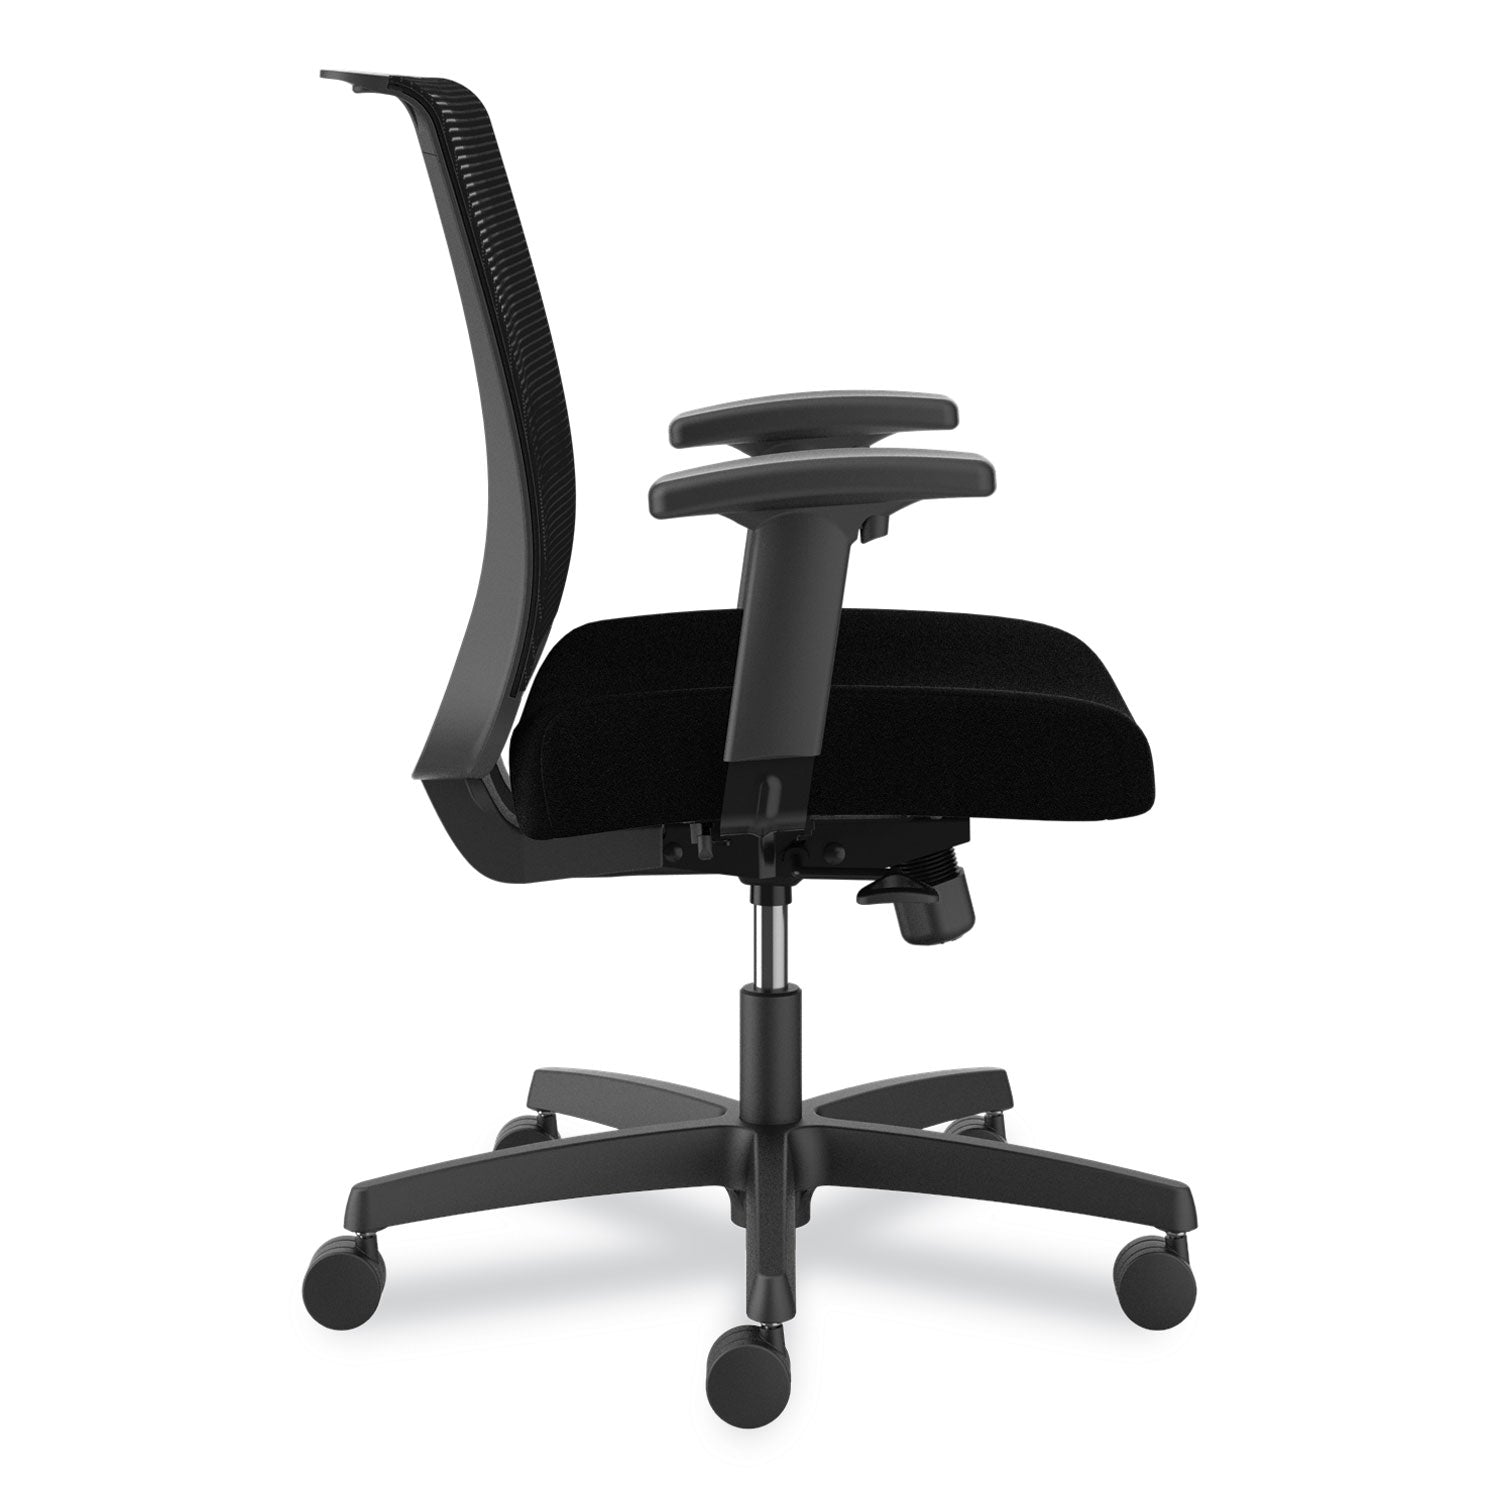 convergence-mid-back-task-chair-swivel-tilt-up-to-275lb-165-to-21-seat-ht-black-seat-back-frameships-in-7-10-bus-days_honcmy1acu10 - 2